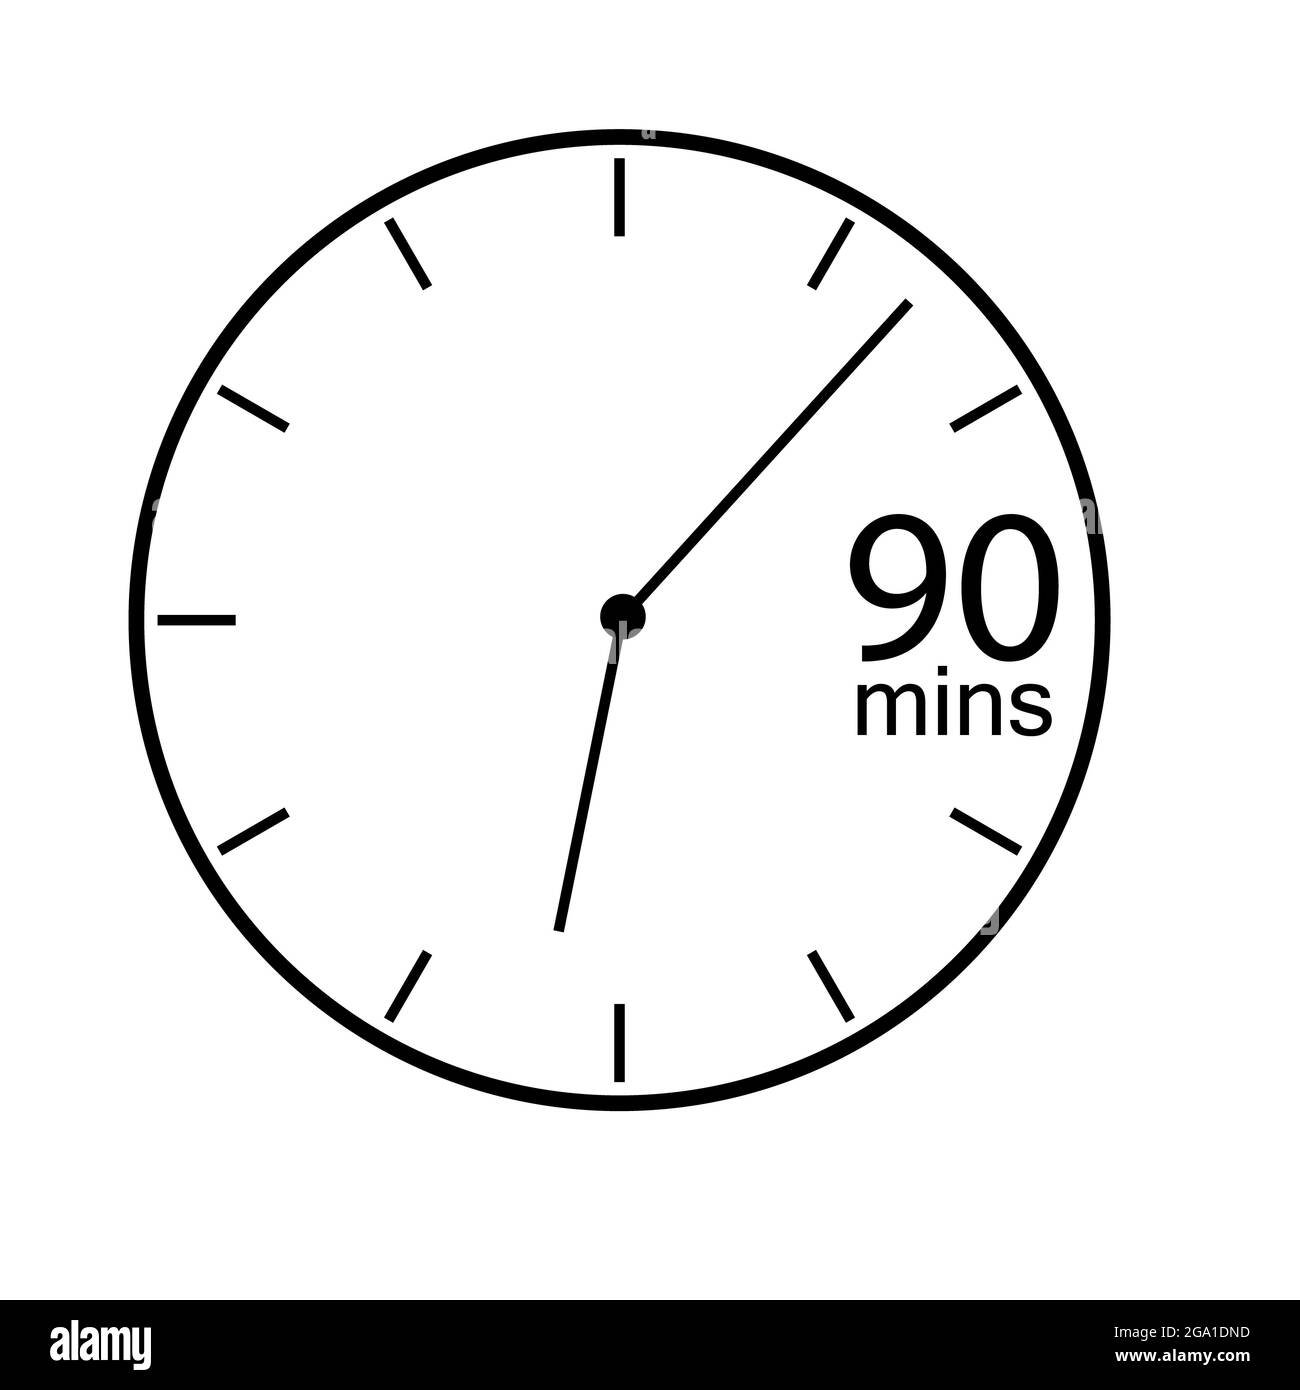 90 mins countdown timer icon on white background. stopwatch symbol. time measurement sign. flat style. Stock Photo